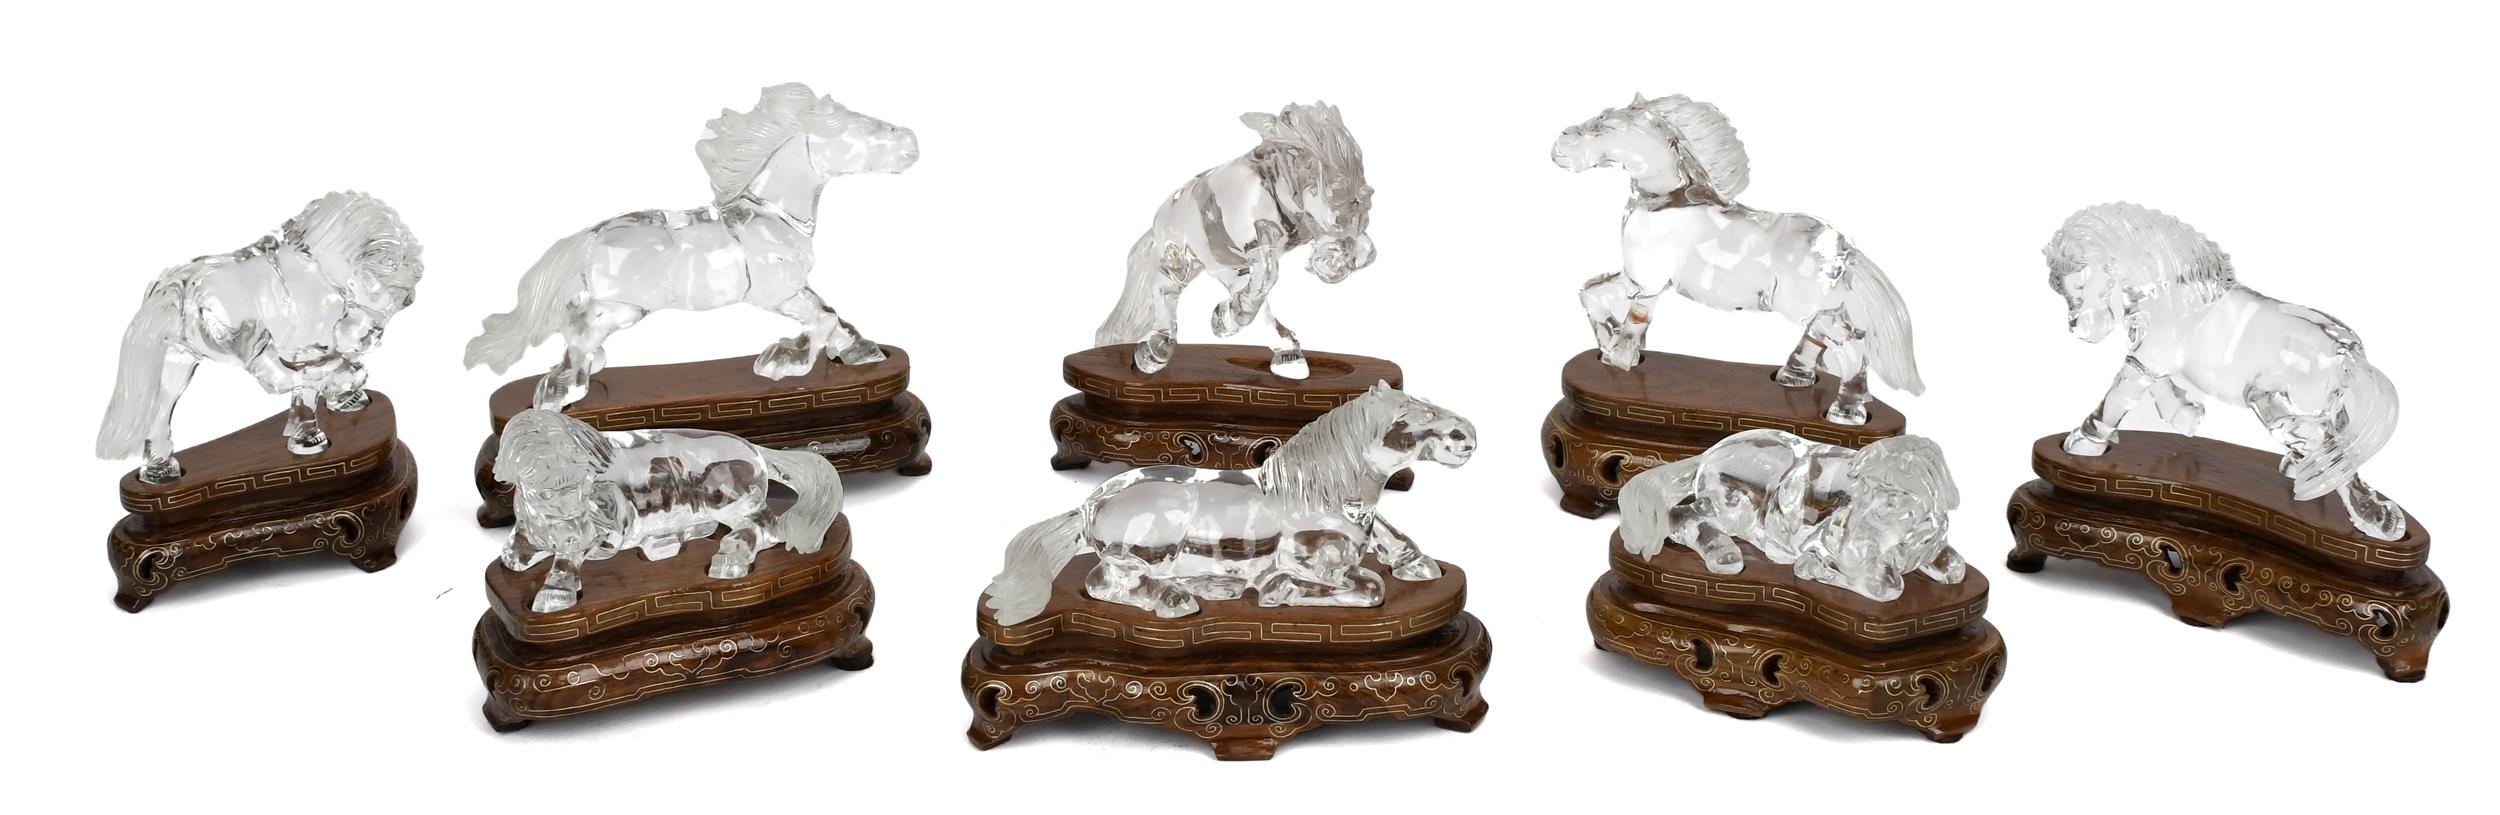 CHINESE CARVED ROCK CRYSTAL HORSES  30782a